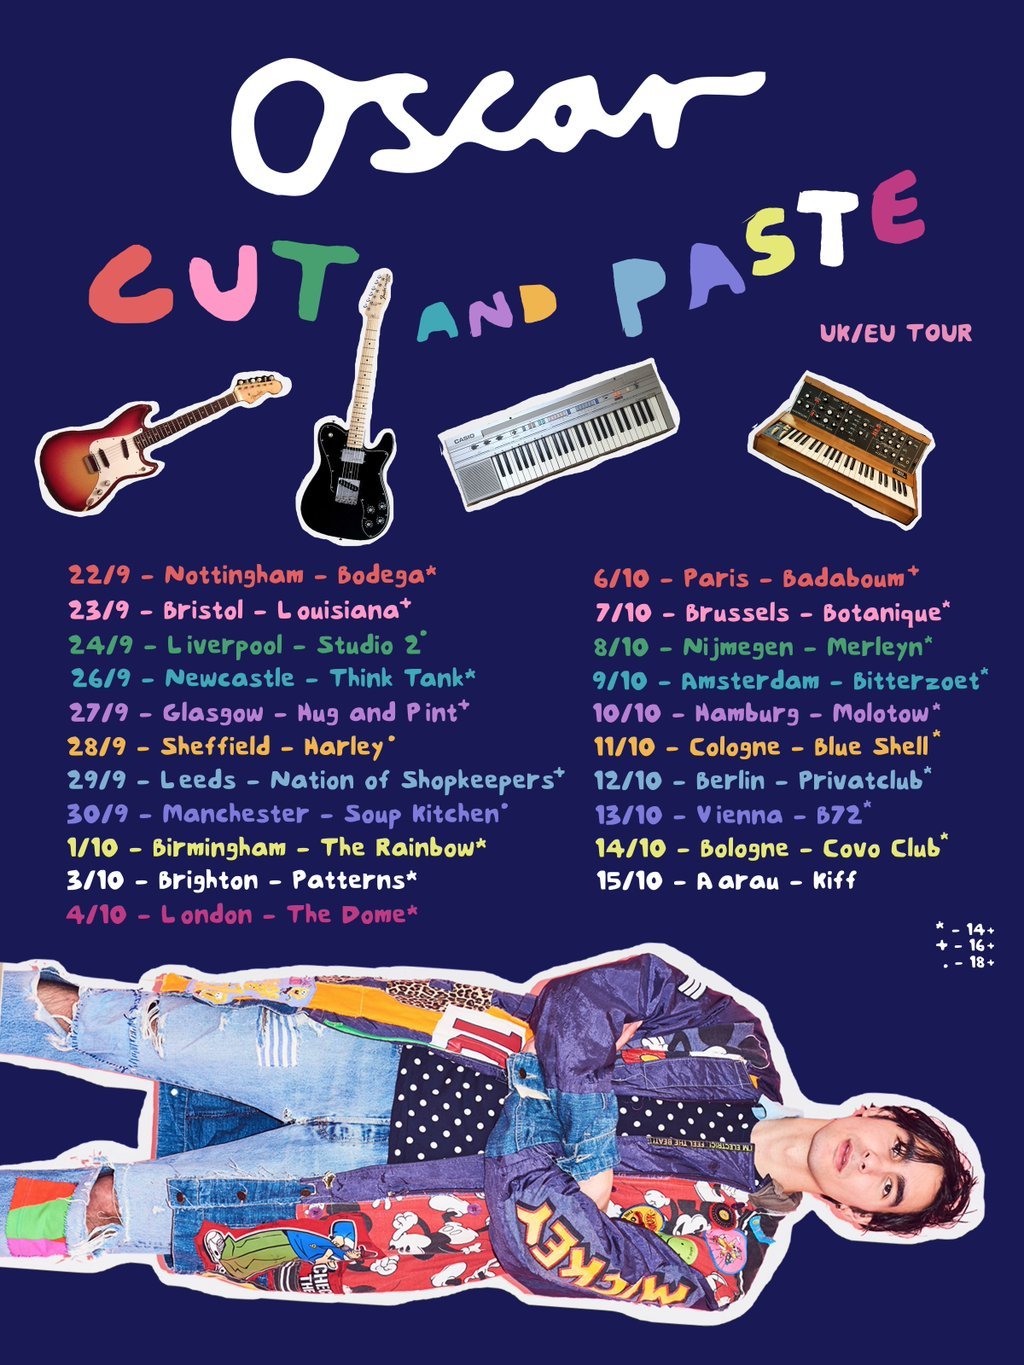 HEADLINE UK/EU TOUR Can’t wait for thisssssssss!!! Most shows are all ages too so party for everyone! xxxx